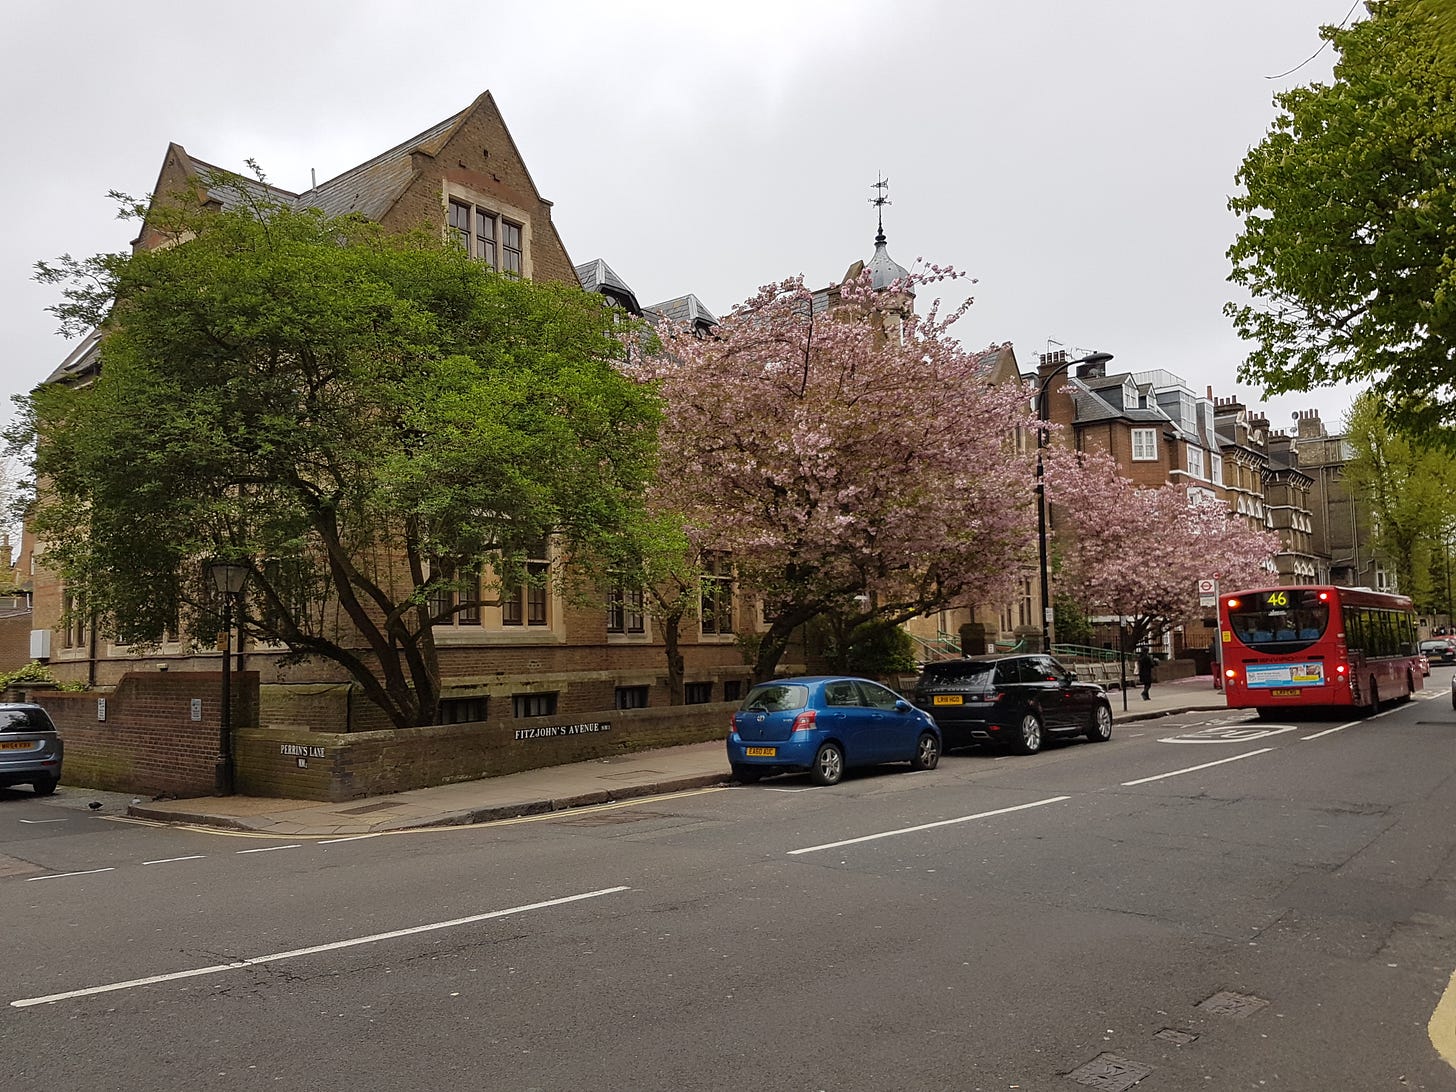 A photo of some pretty houses in Hampstead London neighbourhood